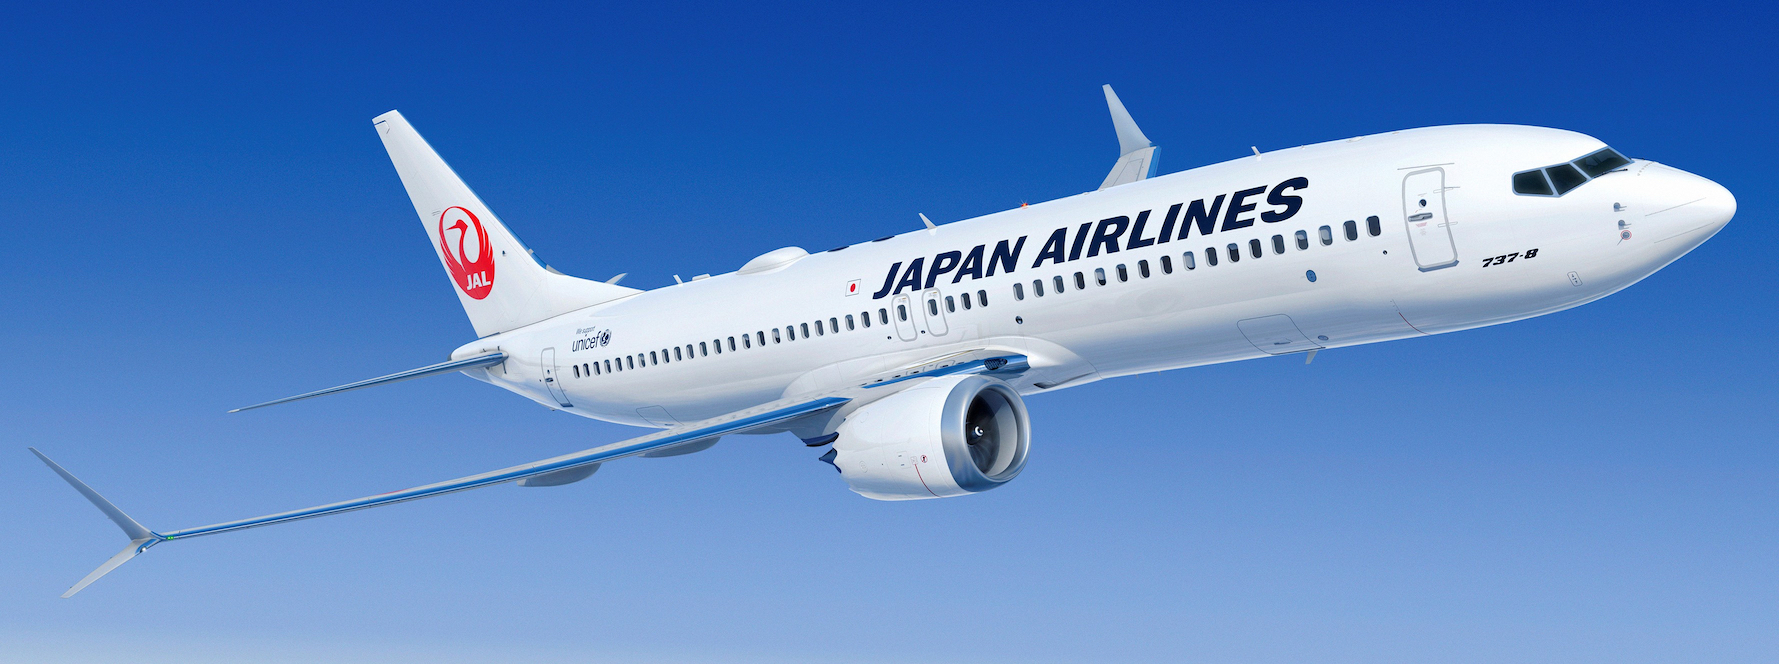 Japan Airlines selected Intelsat to provide in-flight connectivity on more than 20 upcoming Boeing 737 MAX aircraft. Photo: JAL 